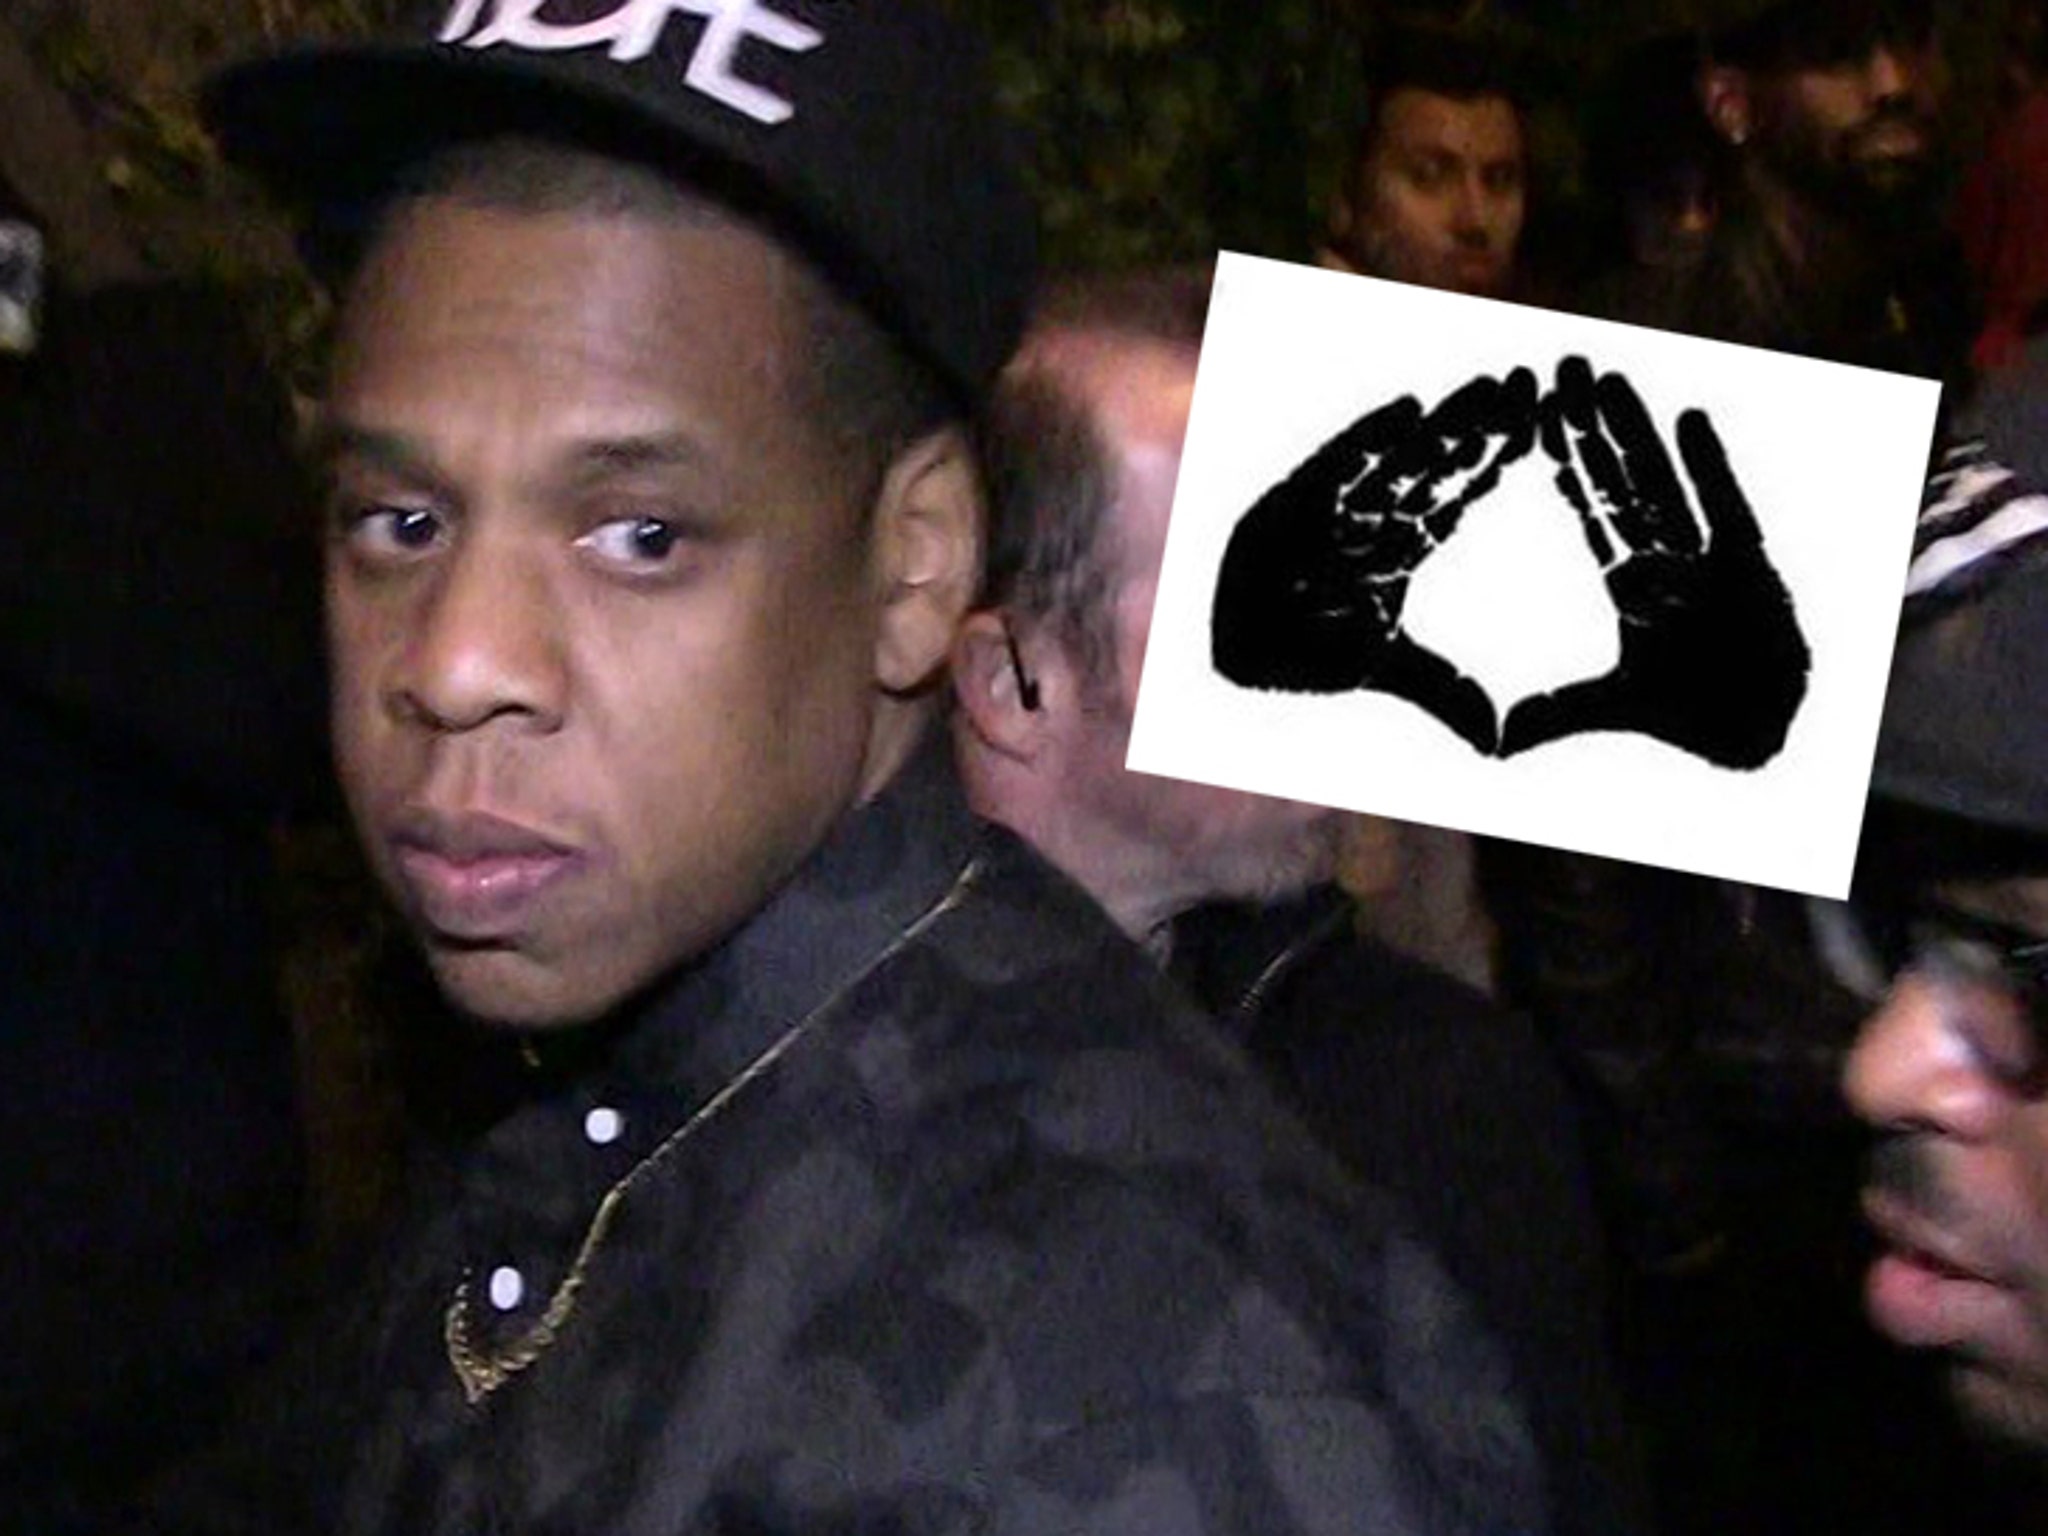 Jay-Z Hands Drink to Fan Trying to Give Him a Fist Bump